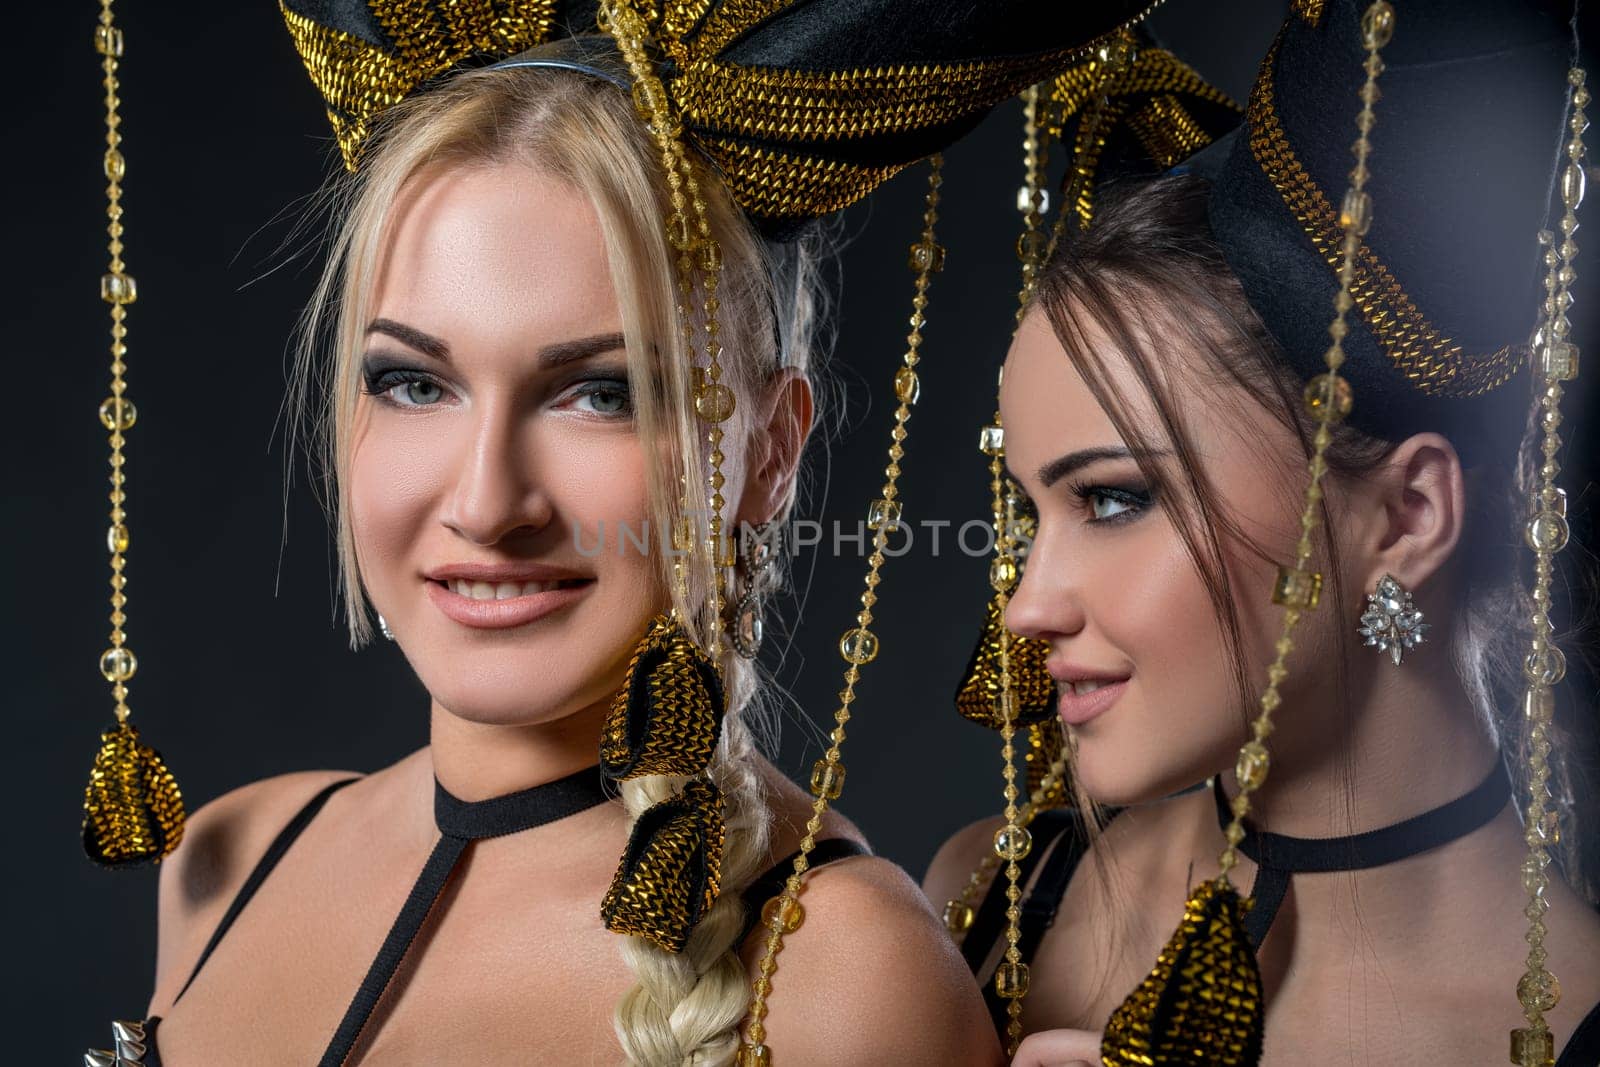 Image of sexy dancers in headdresses with tassels by rivertime